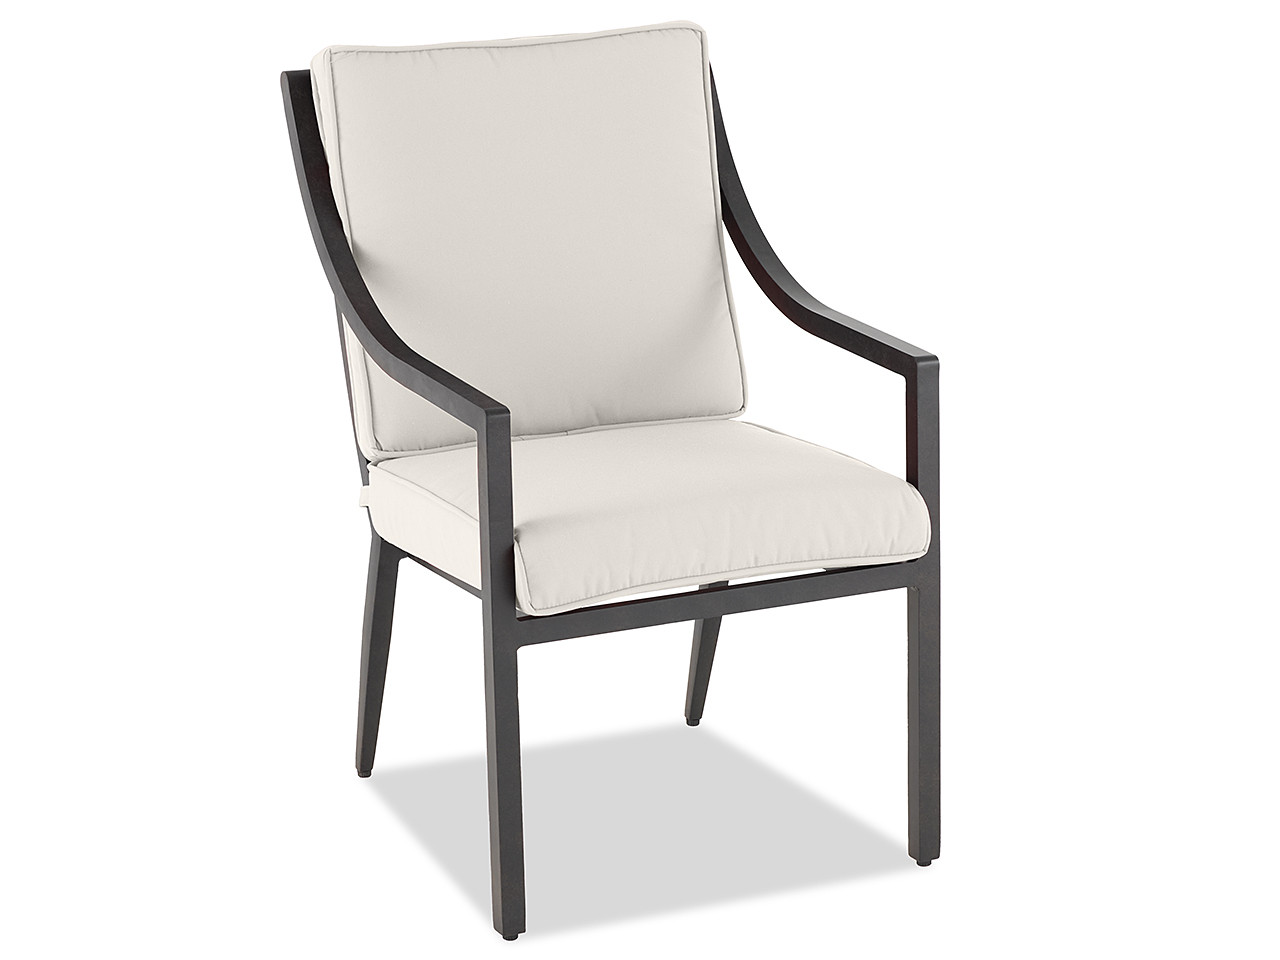 Hill Country Aged Bronze Aluminum and Cushion Dining Chair